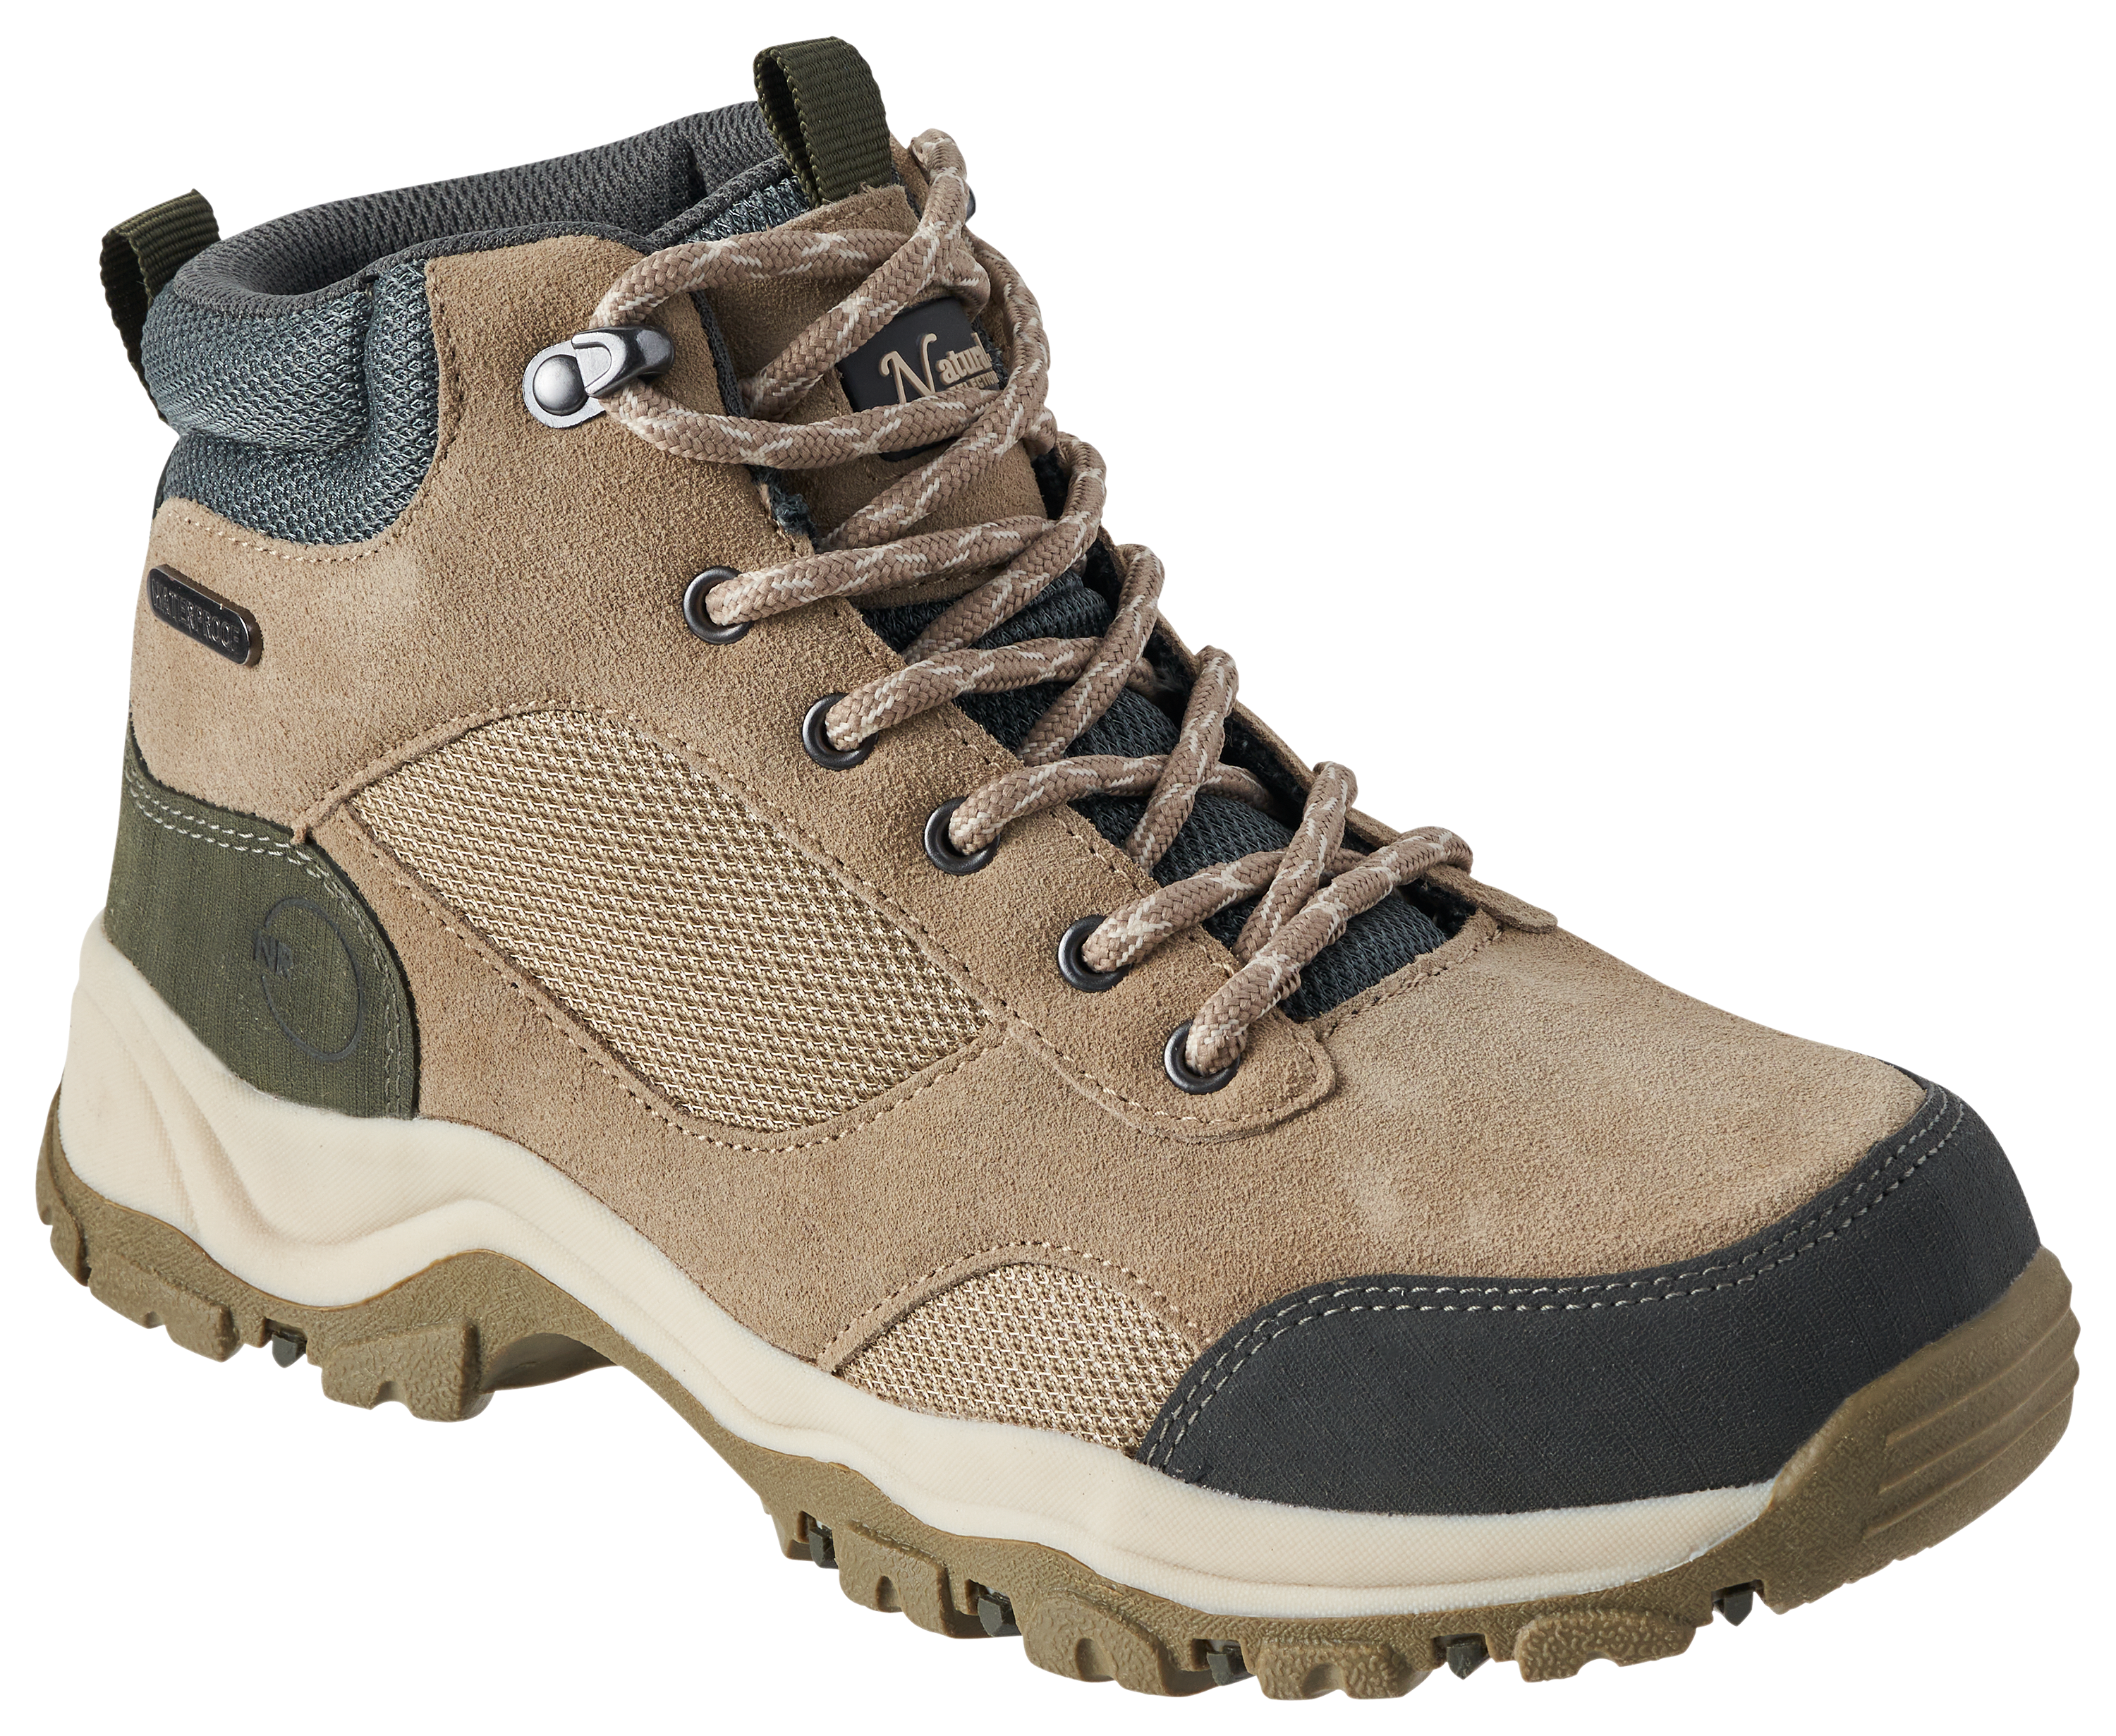 Natural Reflections Skyline II Mid Waterproof Hiking Boots for Ladies - Tan/Charcoal - 6.5M